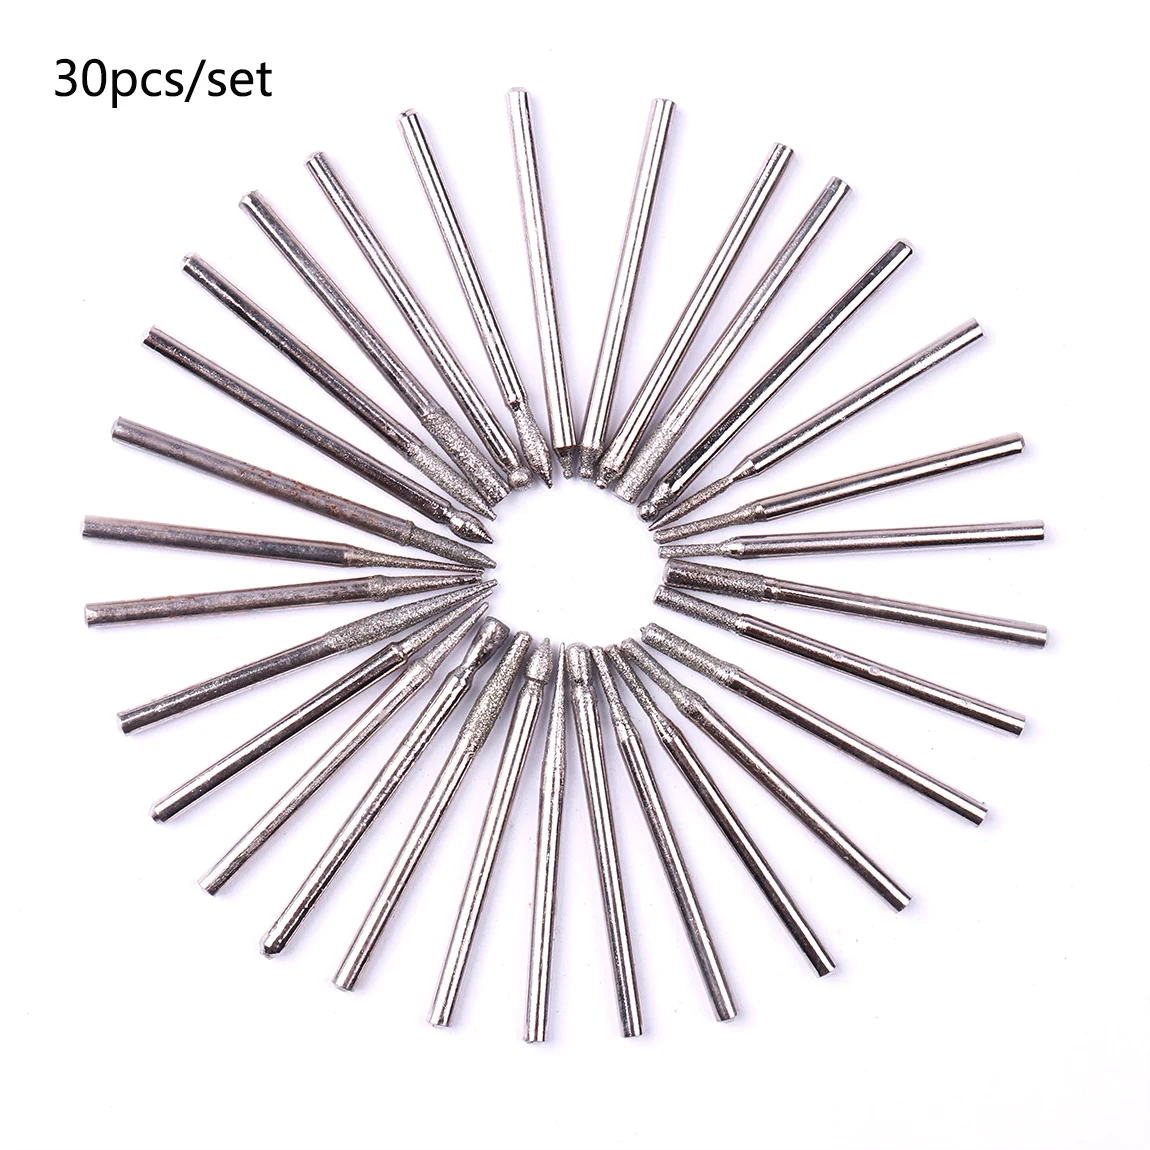 5 pieces 0 5mm 3mm ball round rotary diamond burr drill bit 2 35mm shank glass carving grinding carving polishing drill bit set CHEERBRIGHT 30Pc Diamond Coated Cuticle Removal Nail Drill Set Rotary Grinding Burrs Glass Drill Bit DIYTool Set